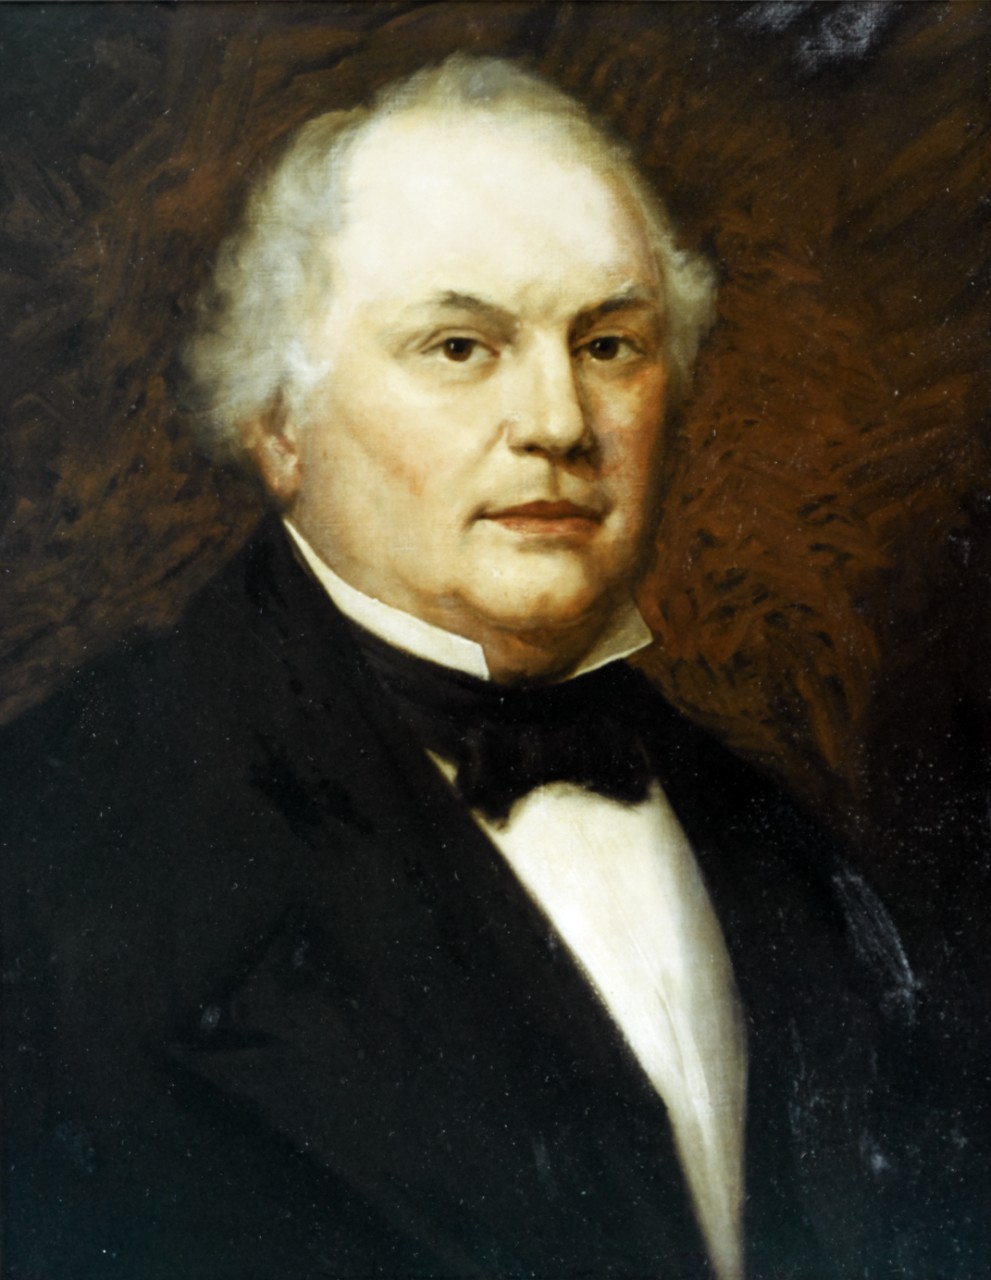 John Y. Mason had been a successful lawyer and landowner in Virginia before becoming involved in national politics.  He served as Secretary of the Navy from 1844-45, and again from 1846-1849.  Mason continued the Navy’s age of scientific exploration, started by the Wilkes Expedition to Antarctica and the Pacific coast, by authorizing Lynch’s trip to the Dead Sea. NHHC Photograph Collection, NH 54775-KN. 